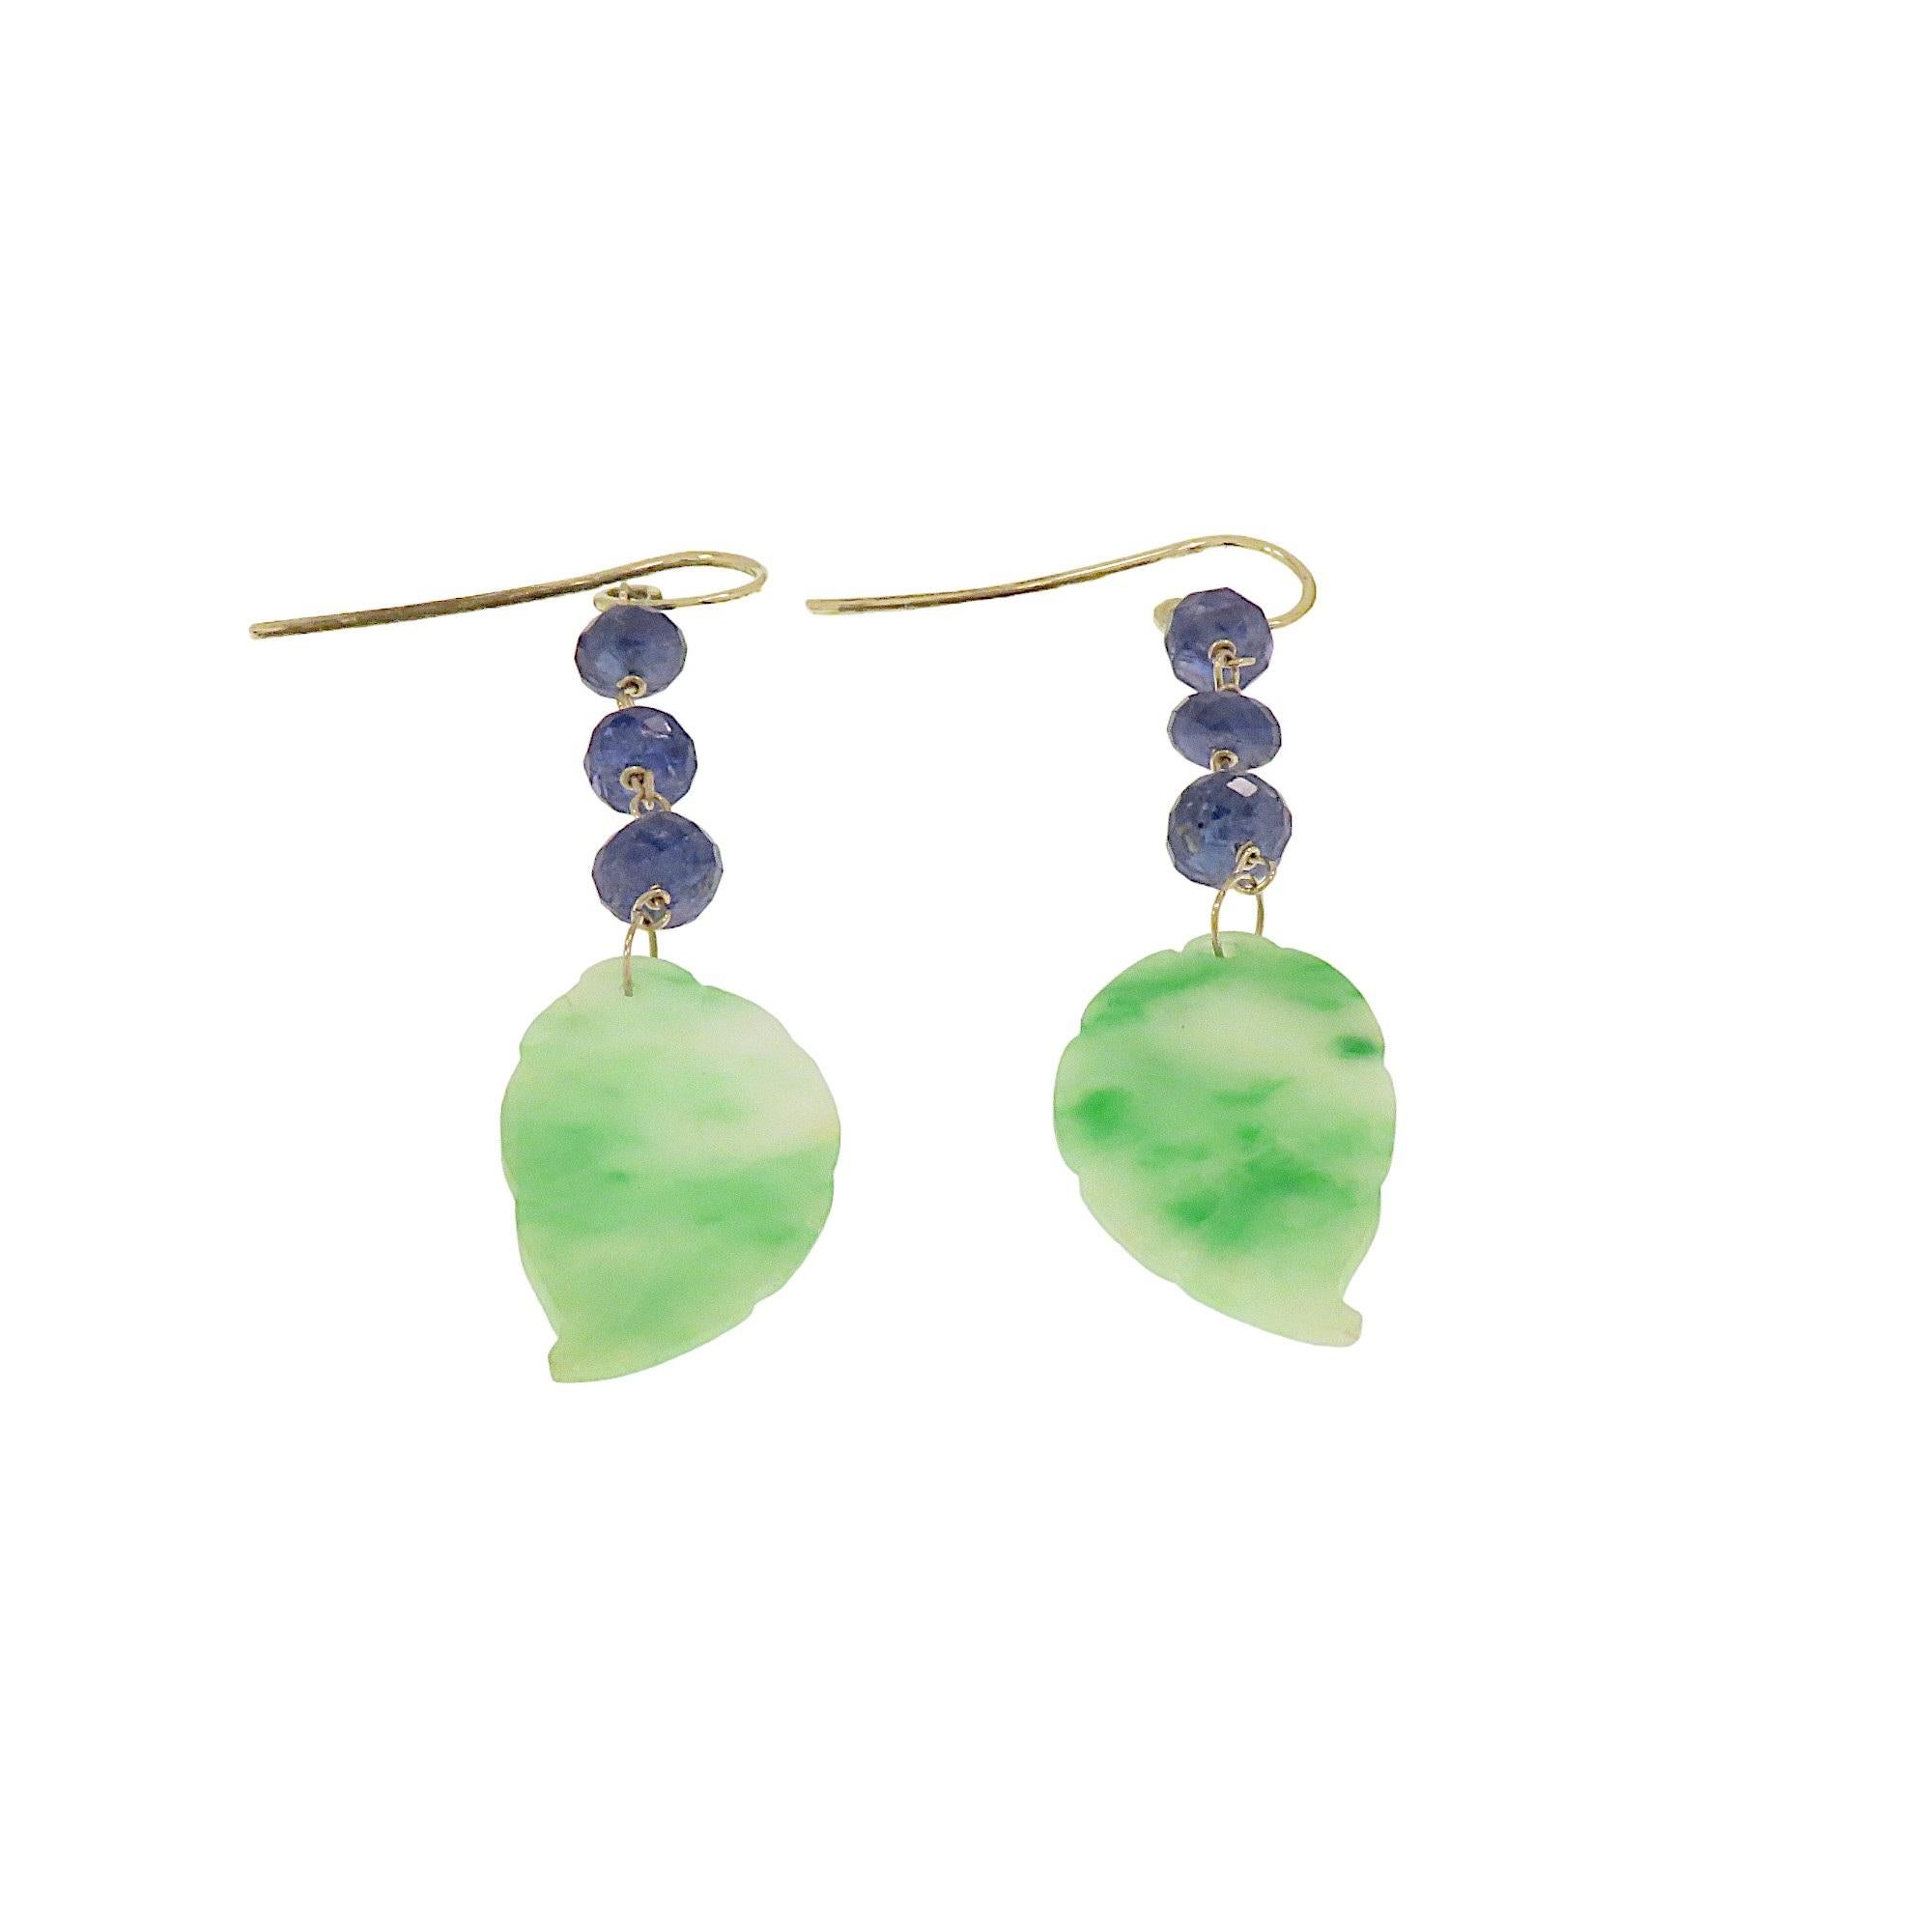 Mixed Cut Botta jewelry earrings with blue jade green sapphires in white gold For Sale